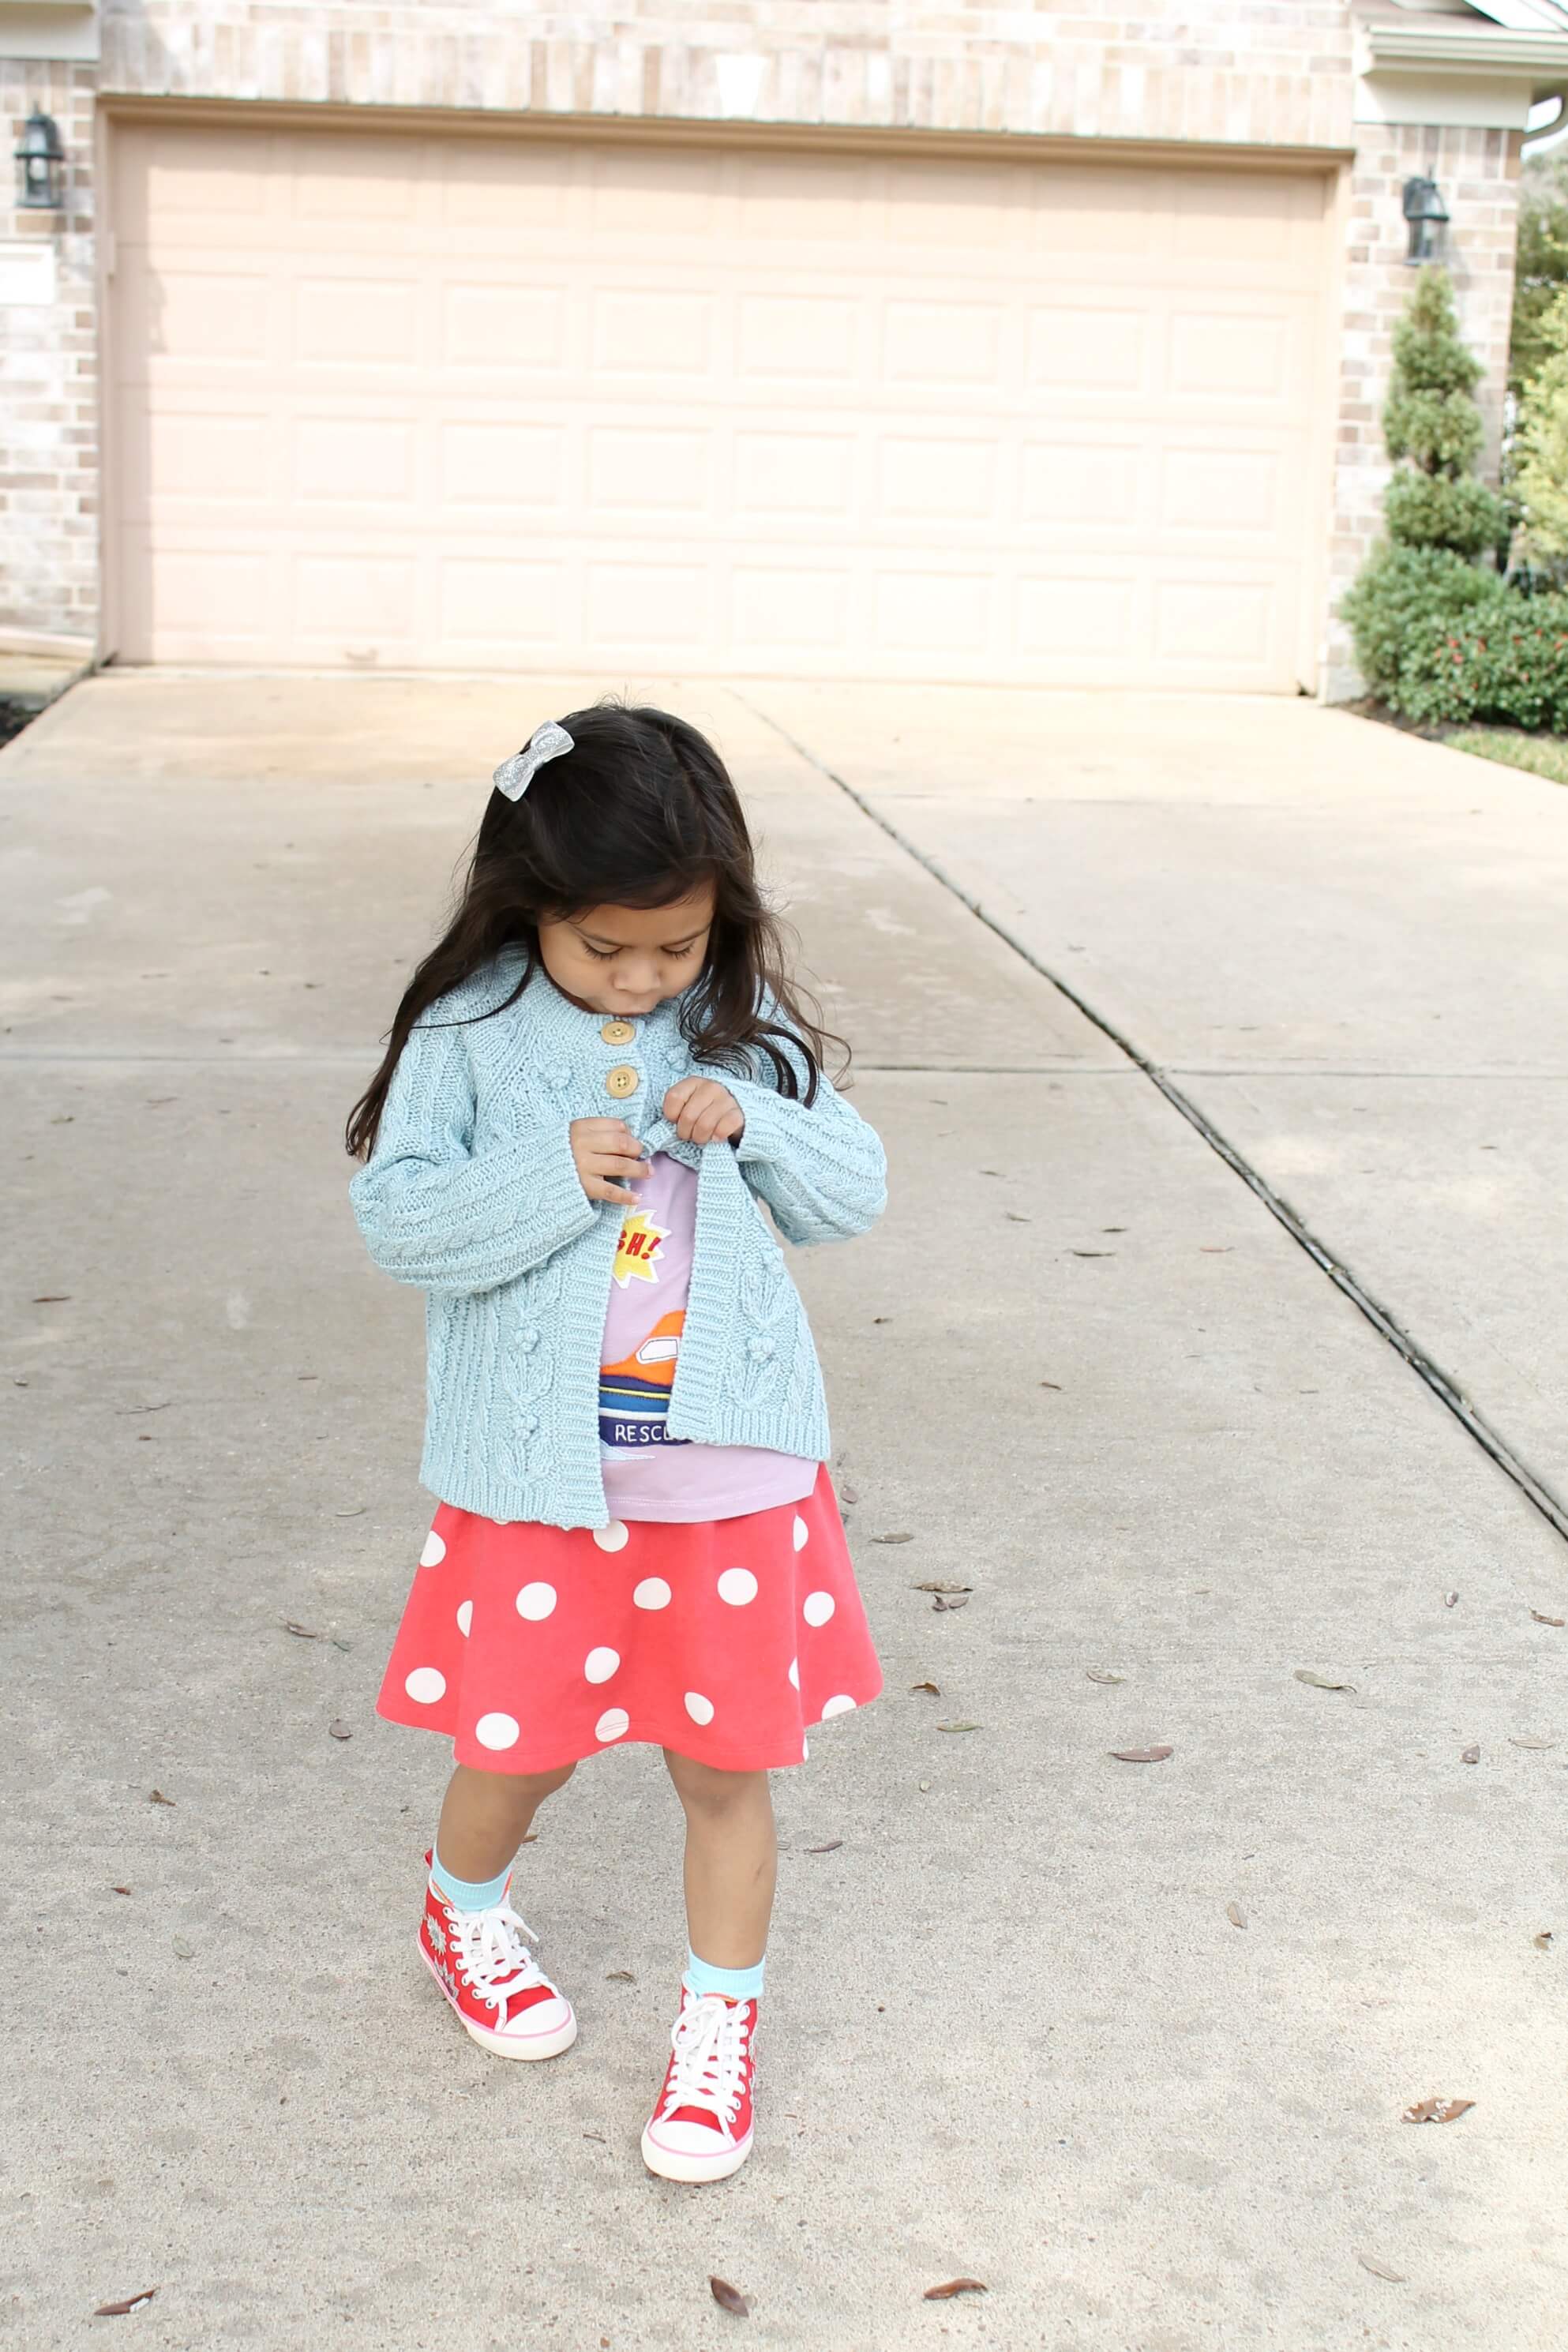 Cutest cardigan! Cute kids spring clothes with a hero & rescue theme. Mini Boden's spring line & 500 giveaway! #minibodentotherescue